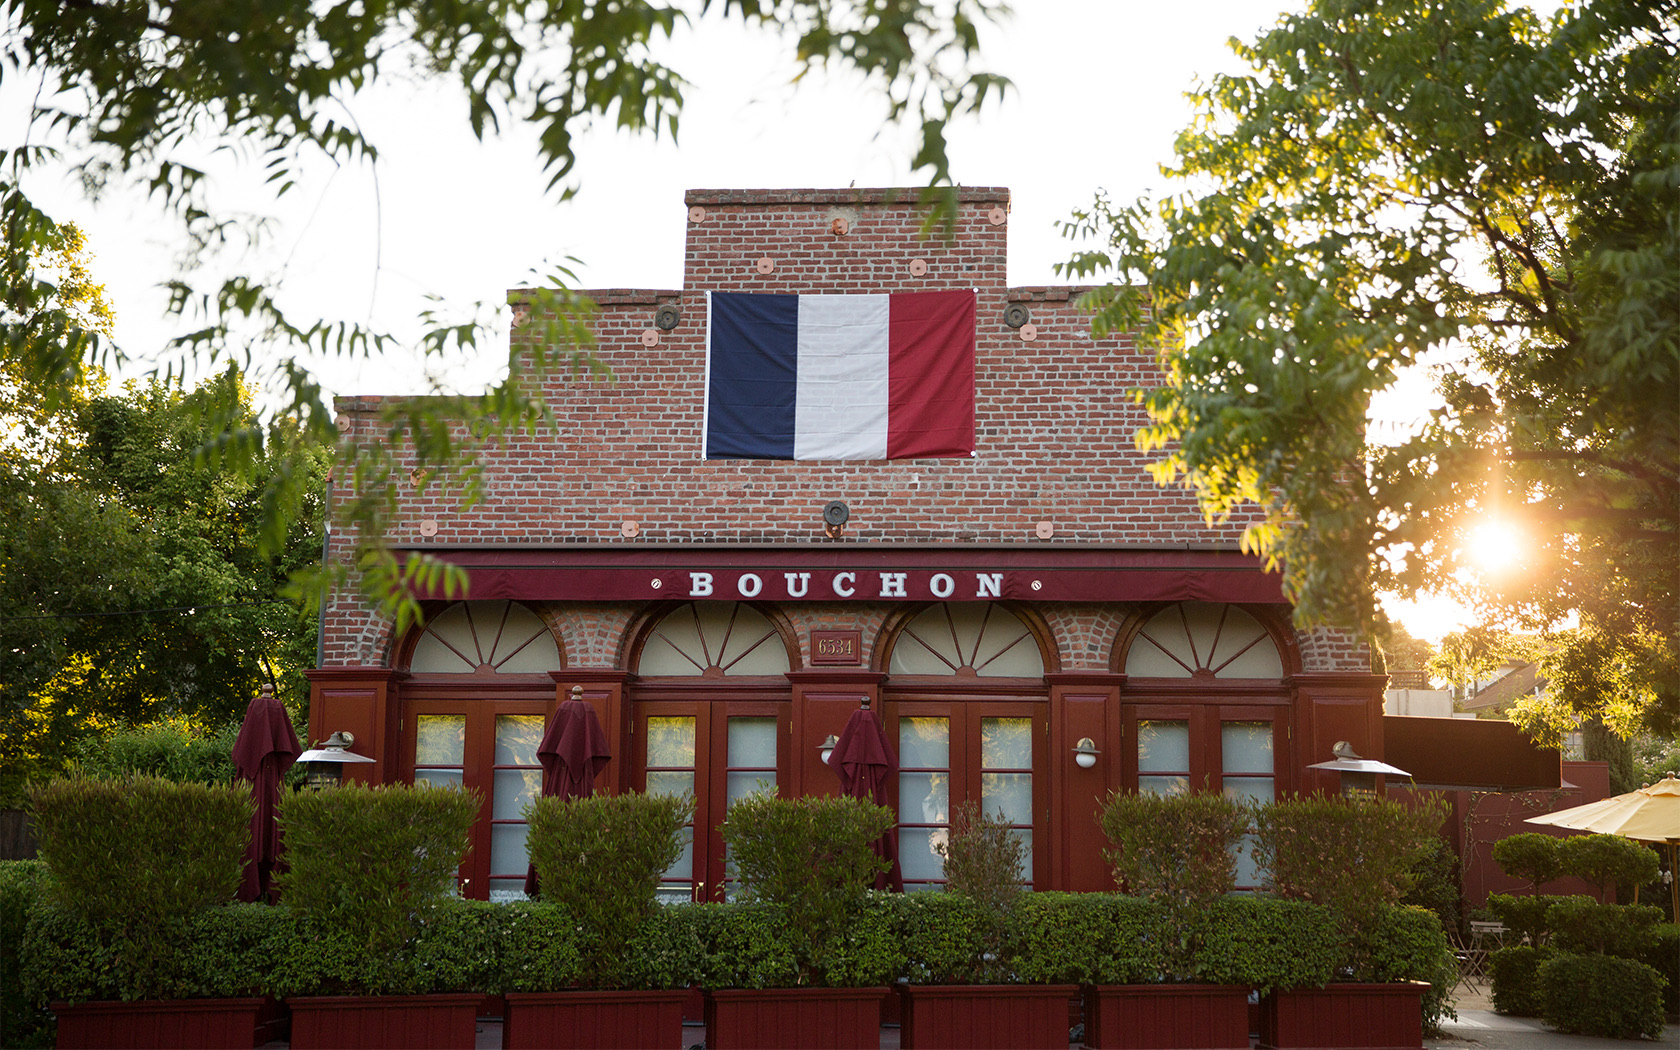 View of the Bouchon facade with a french flag 